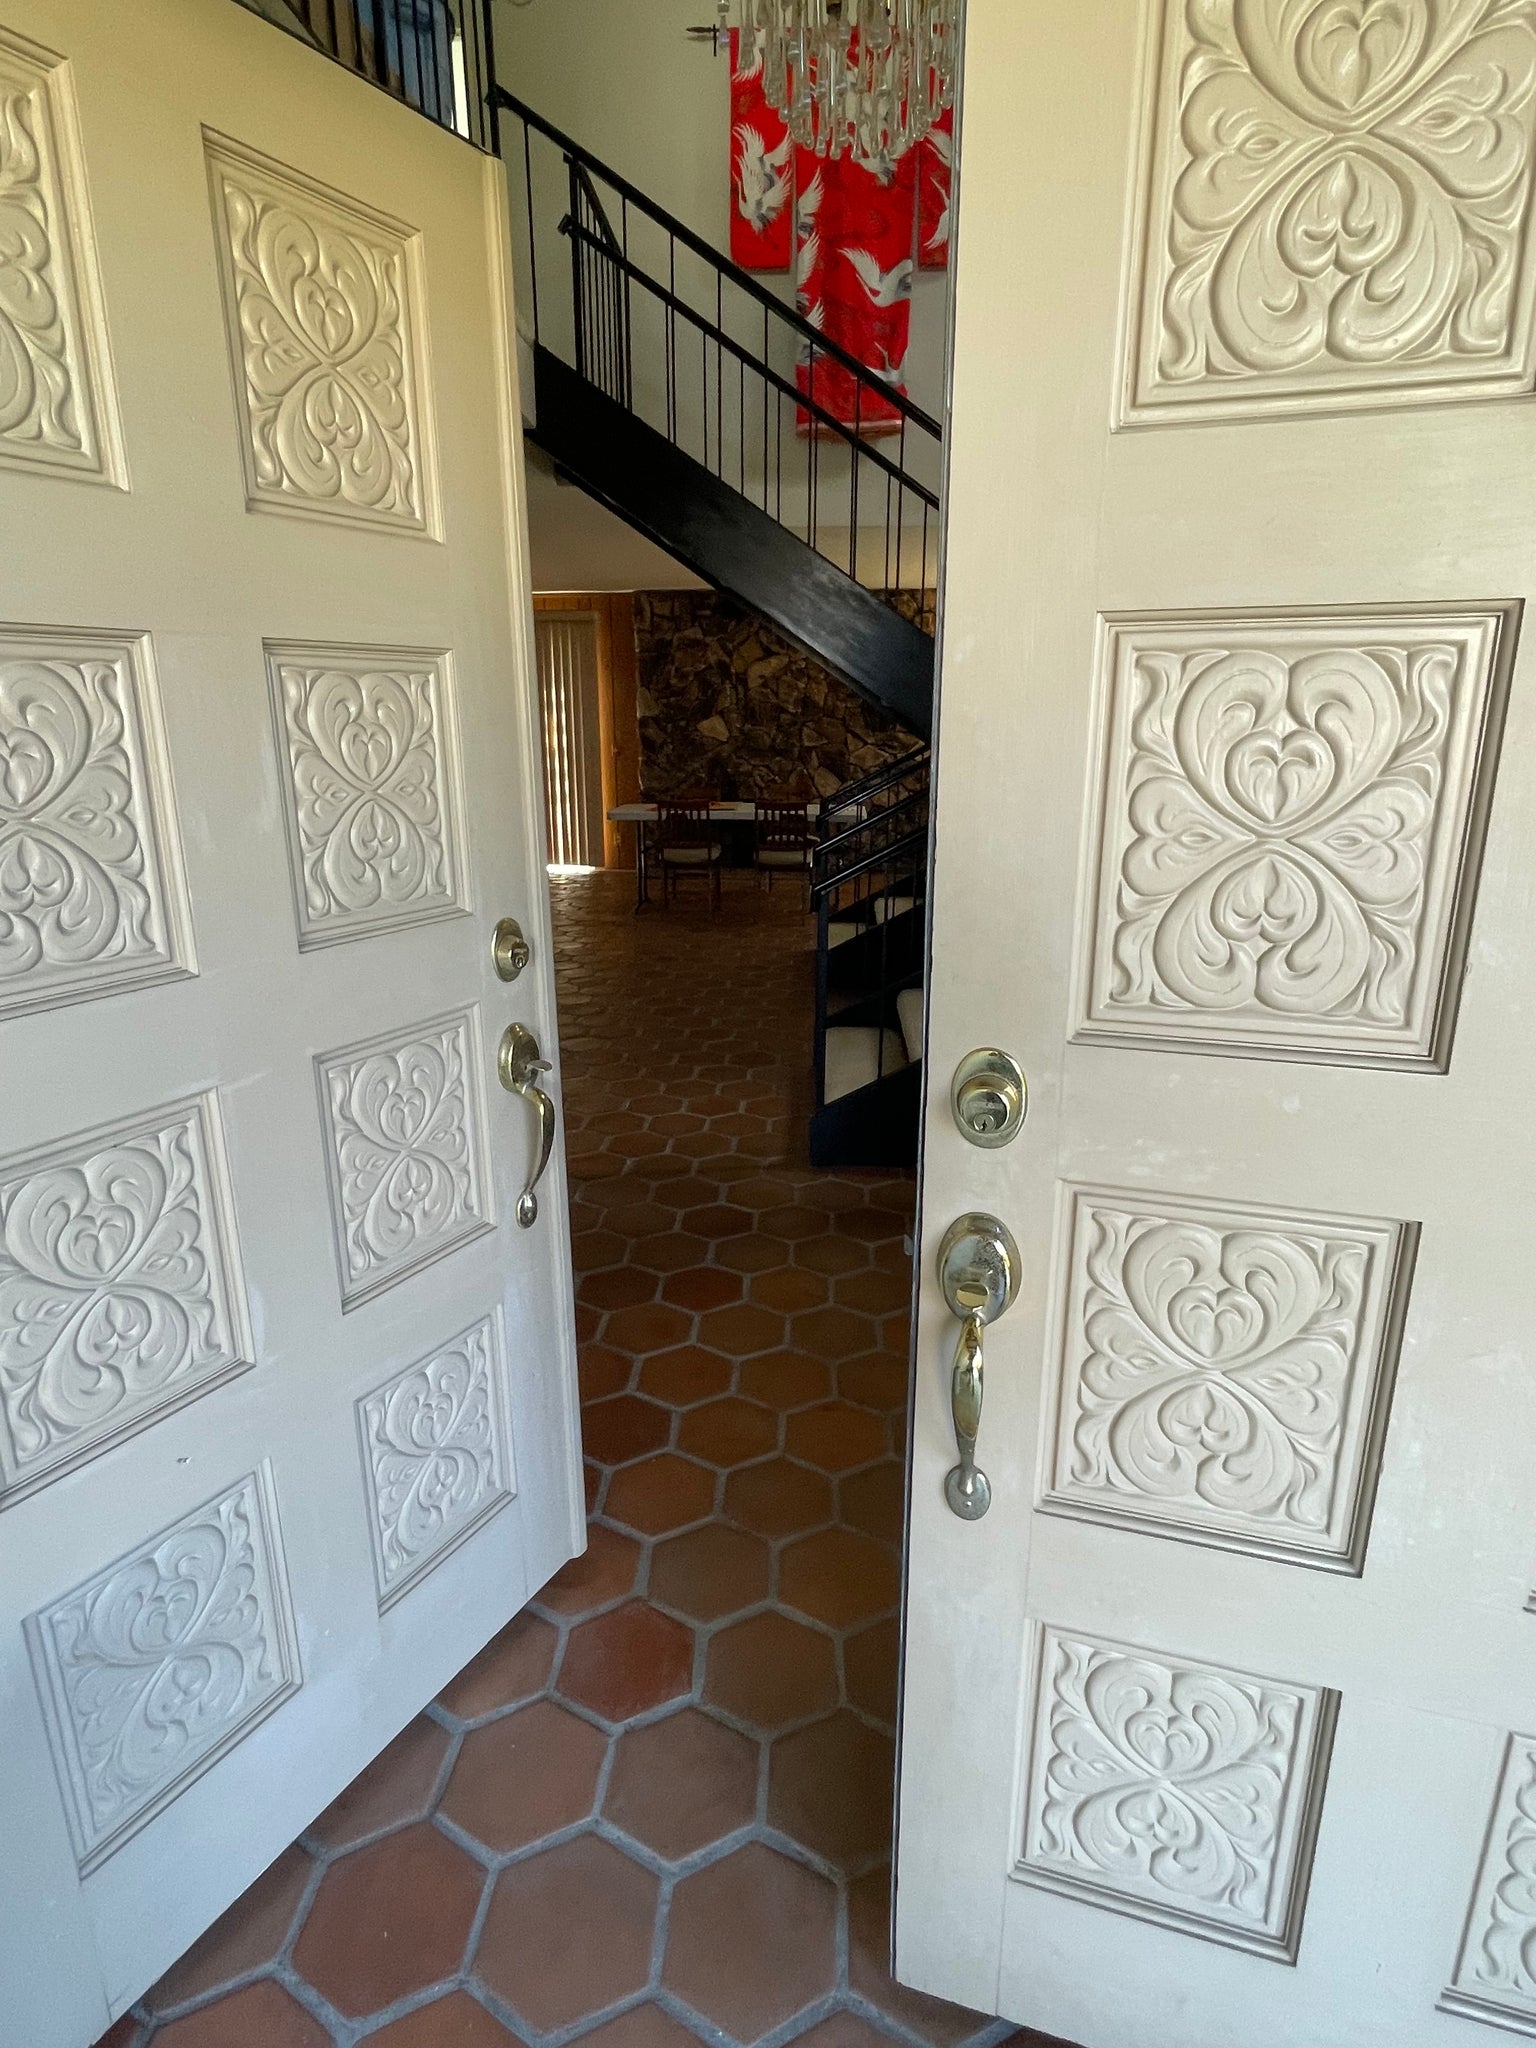 How to blend old saltillo tiles